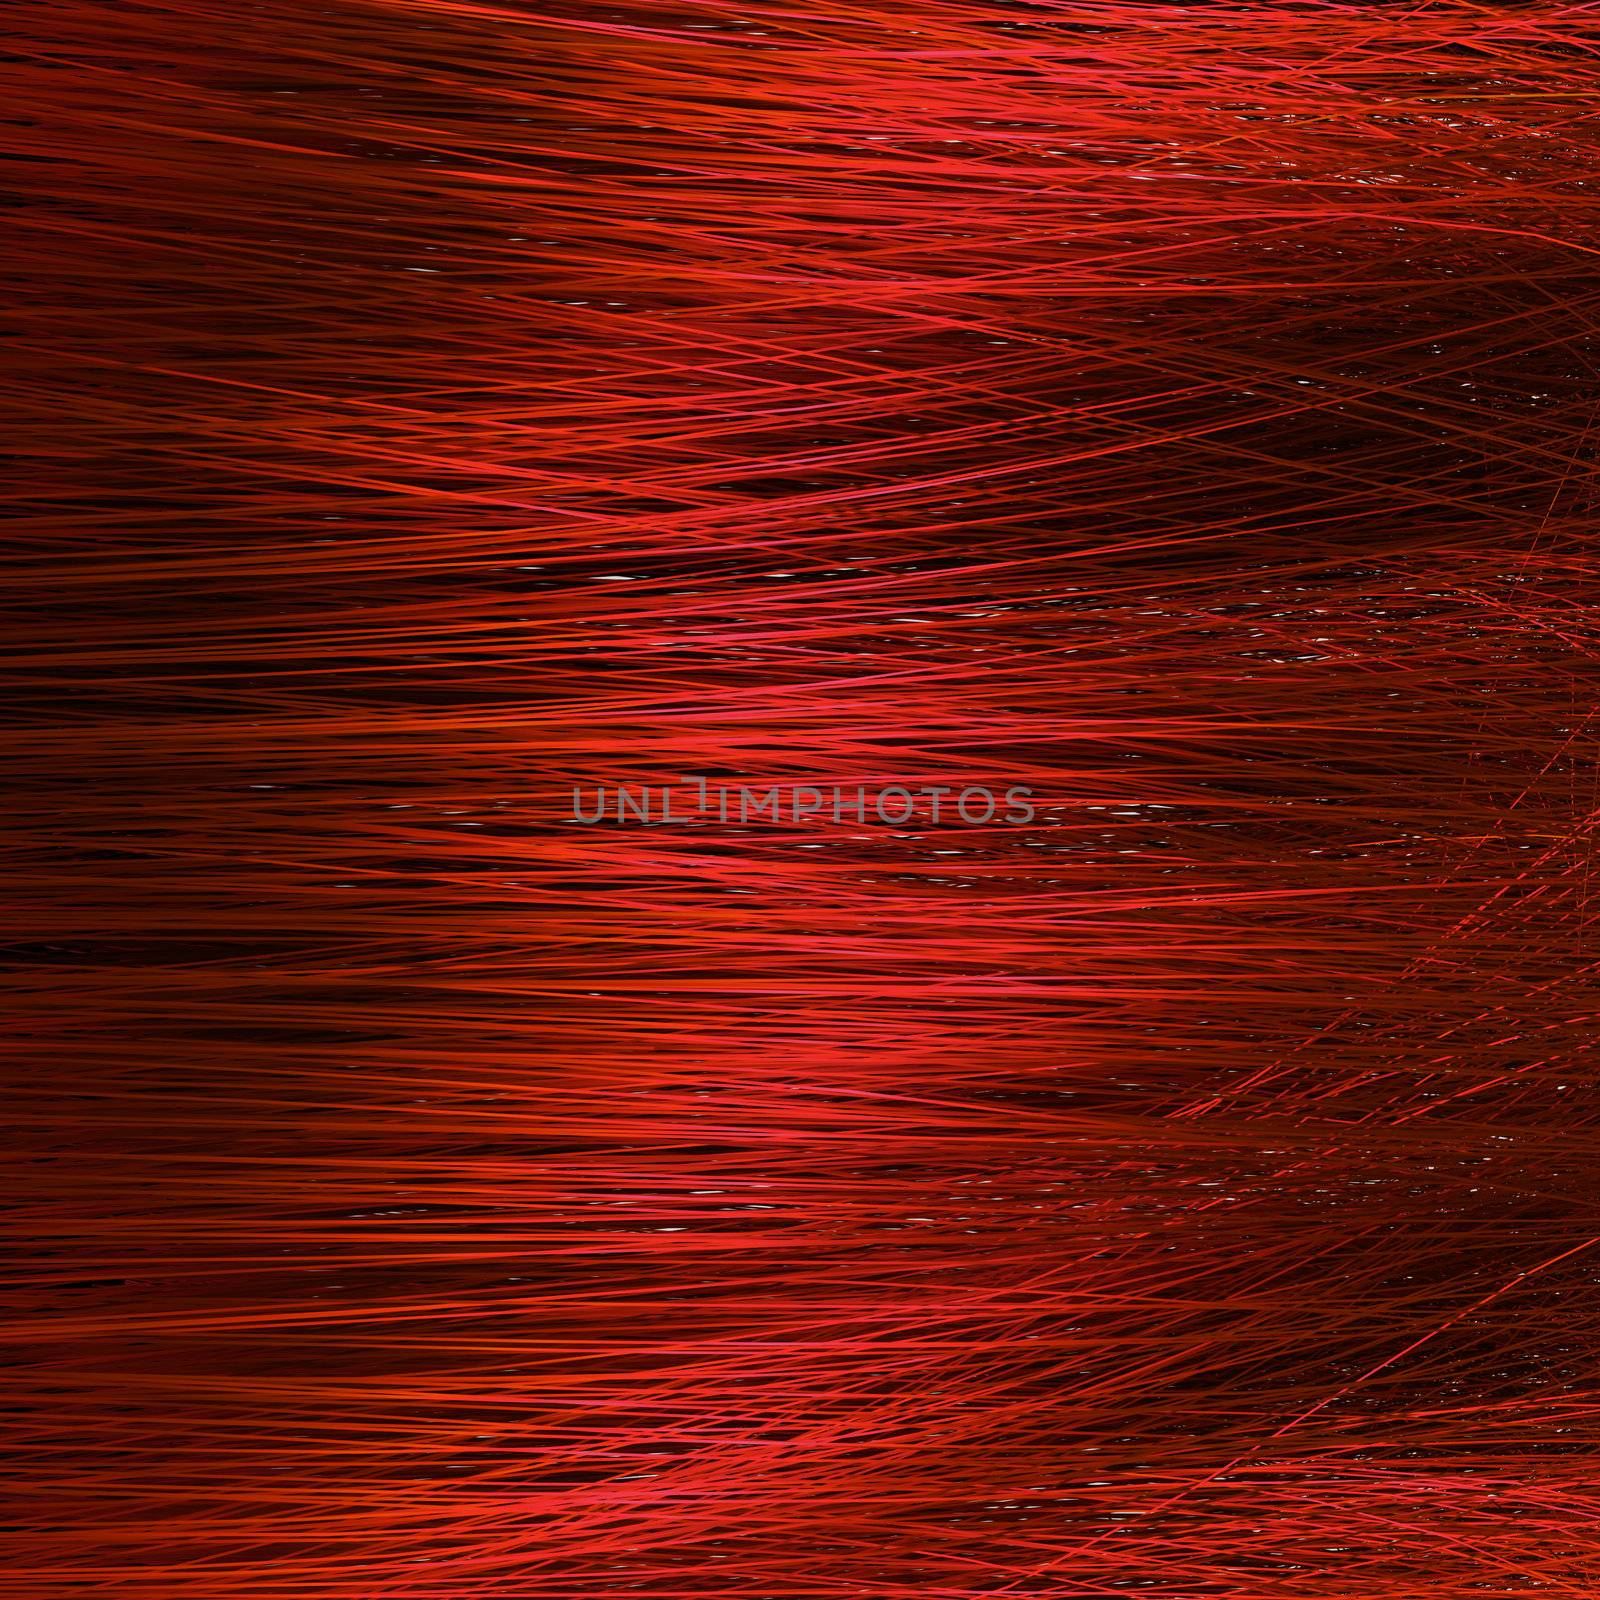 Detail of red hair texture 